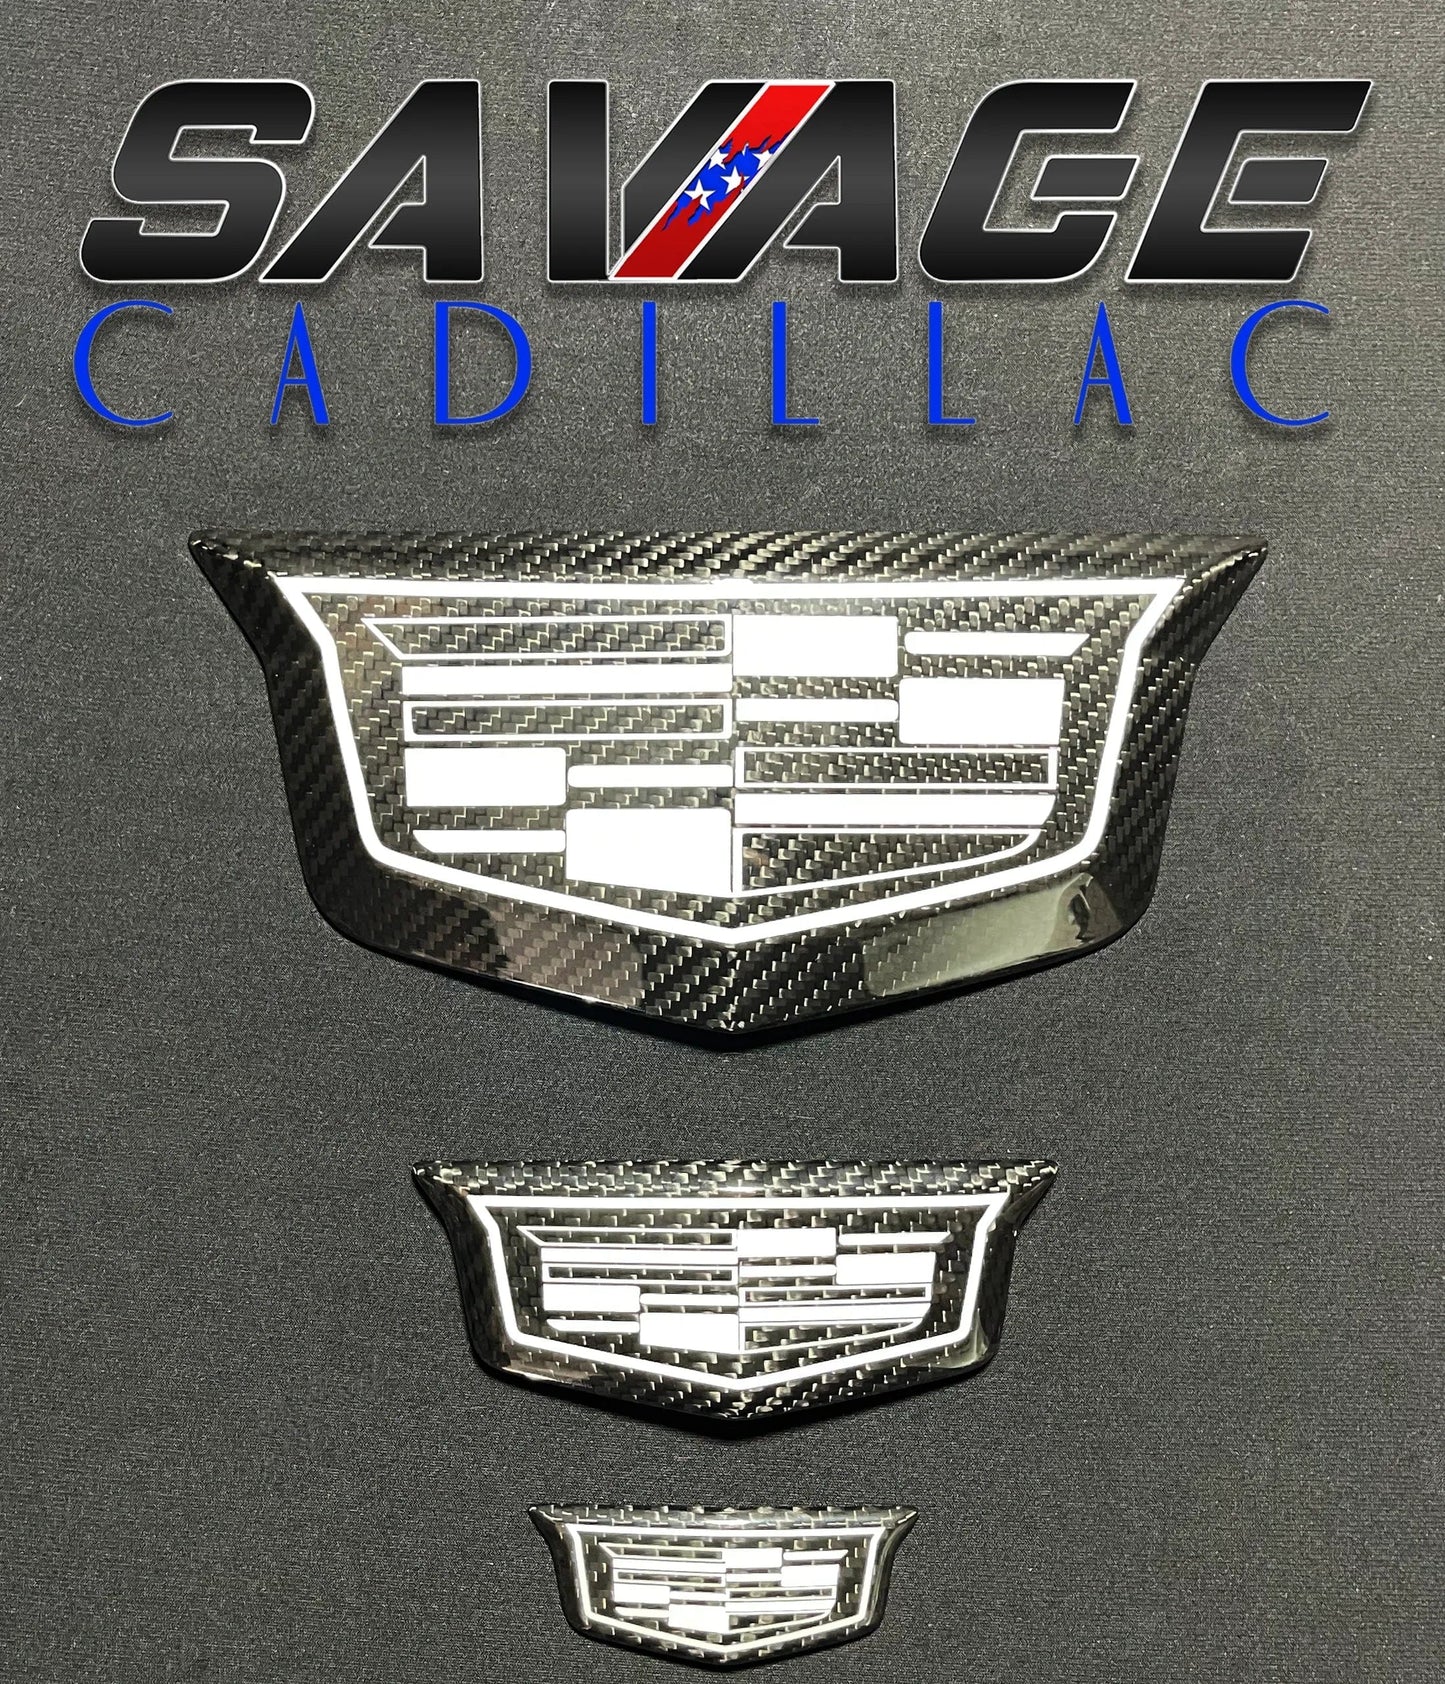 CT5 Front Grille, Rear Trunk & Steering Wheel Genuine Carbon Fiber Cadillac Shield Emblem Covers